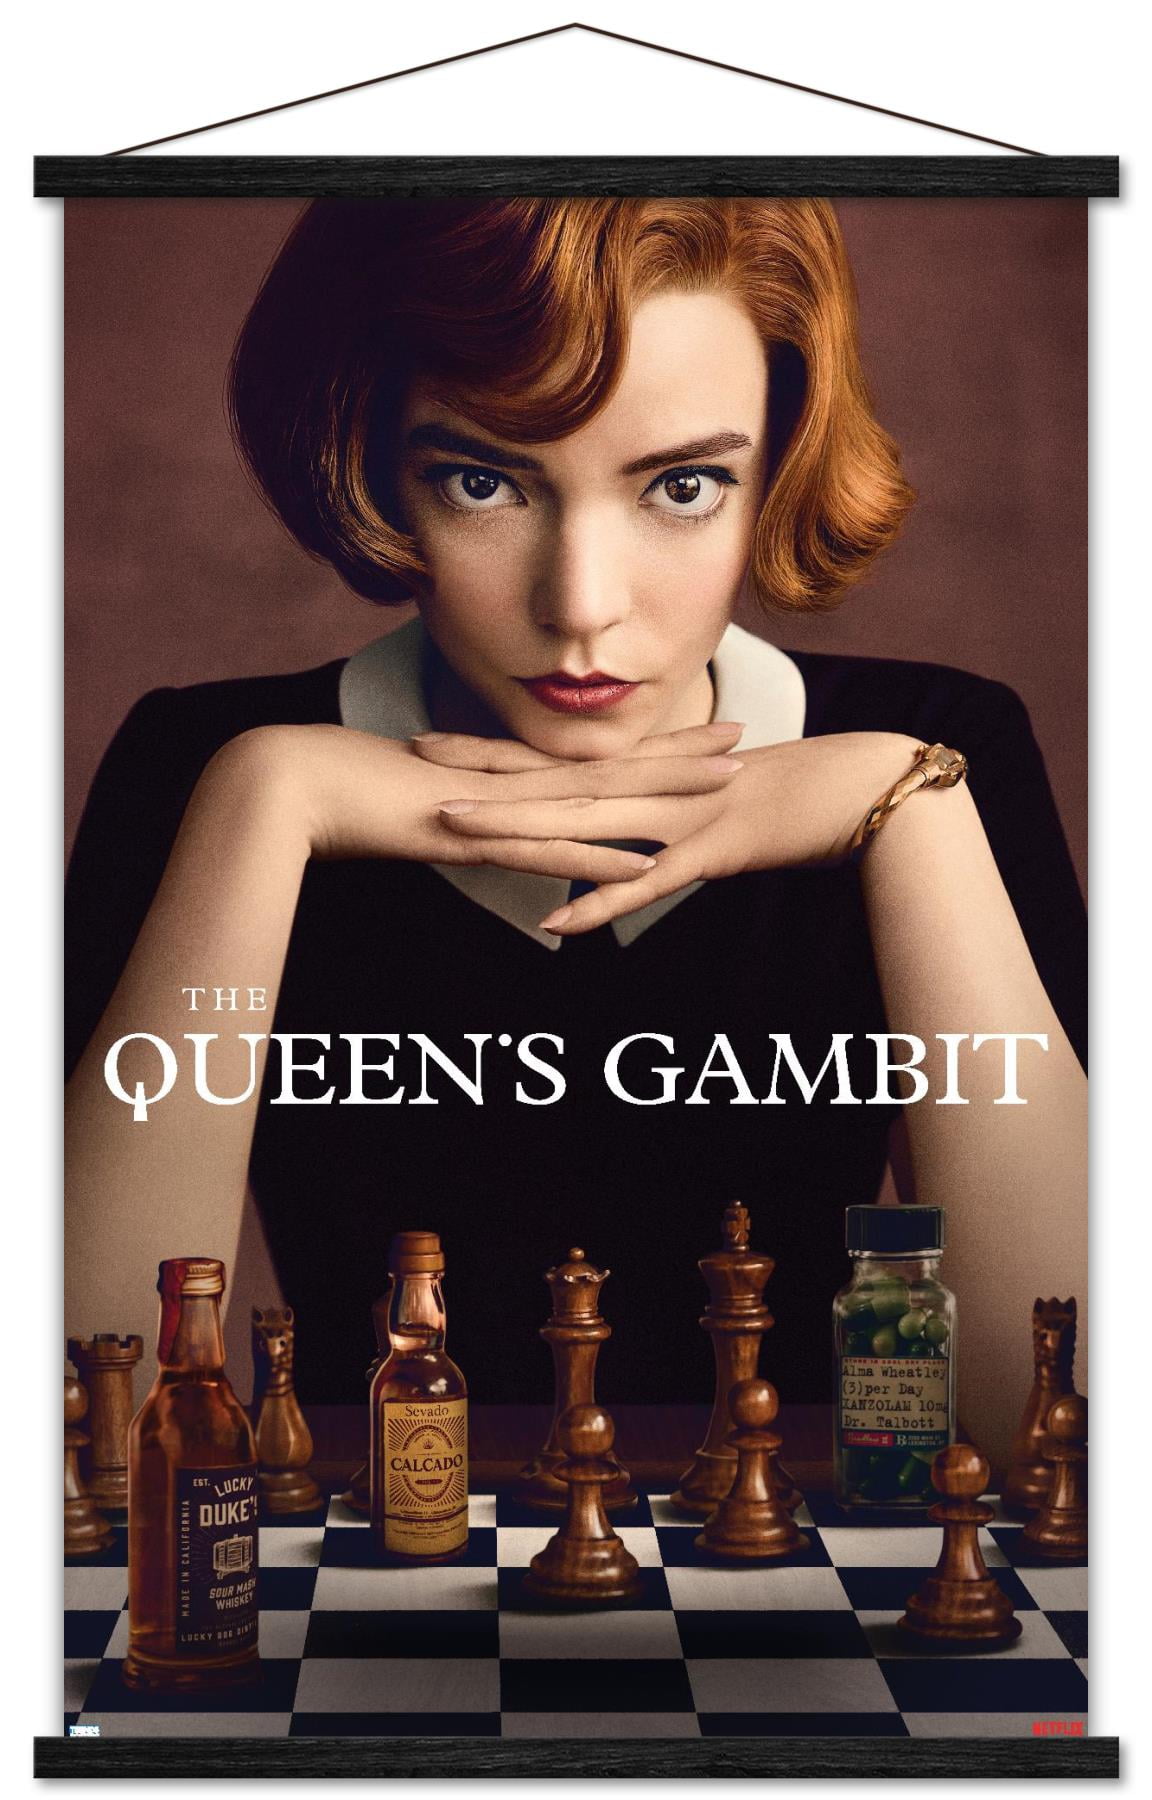 The Queen's Gambit is out on Netflix